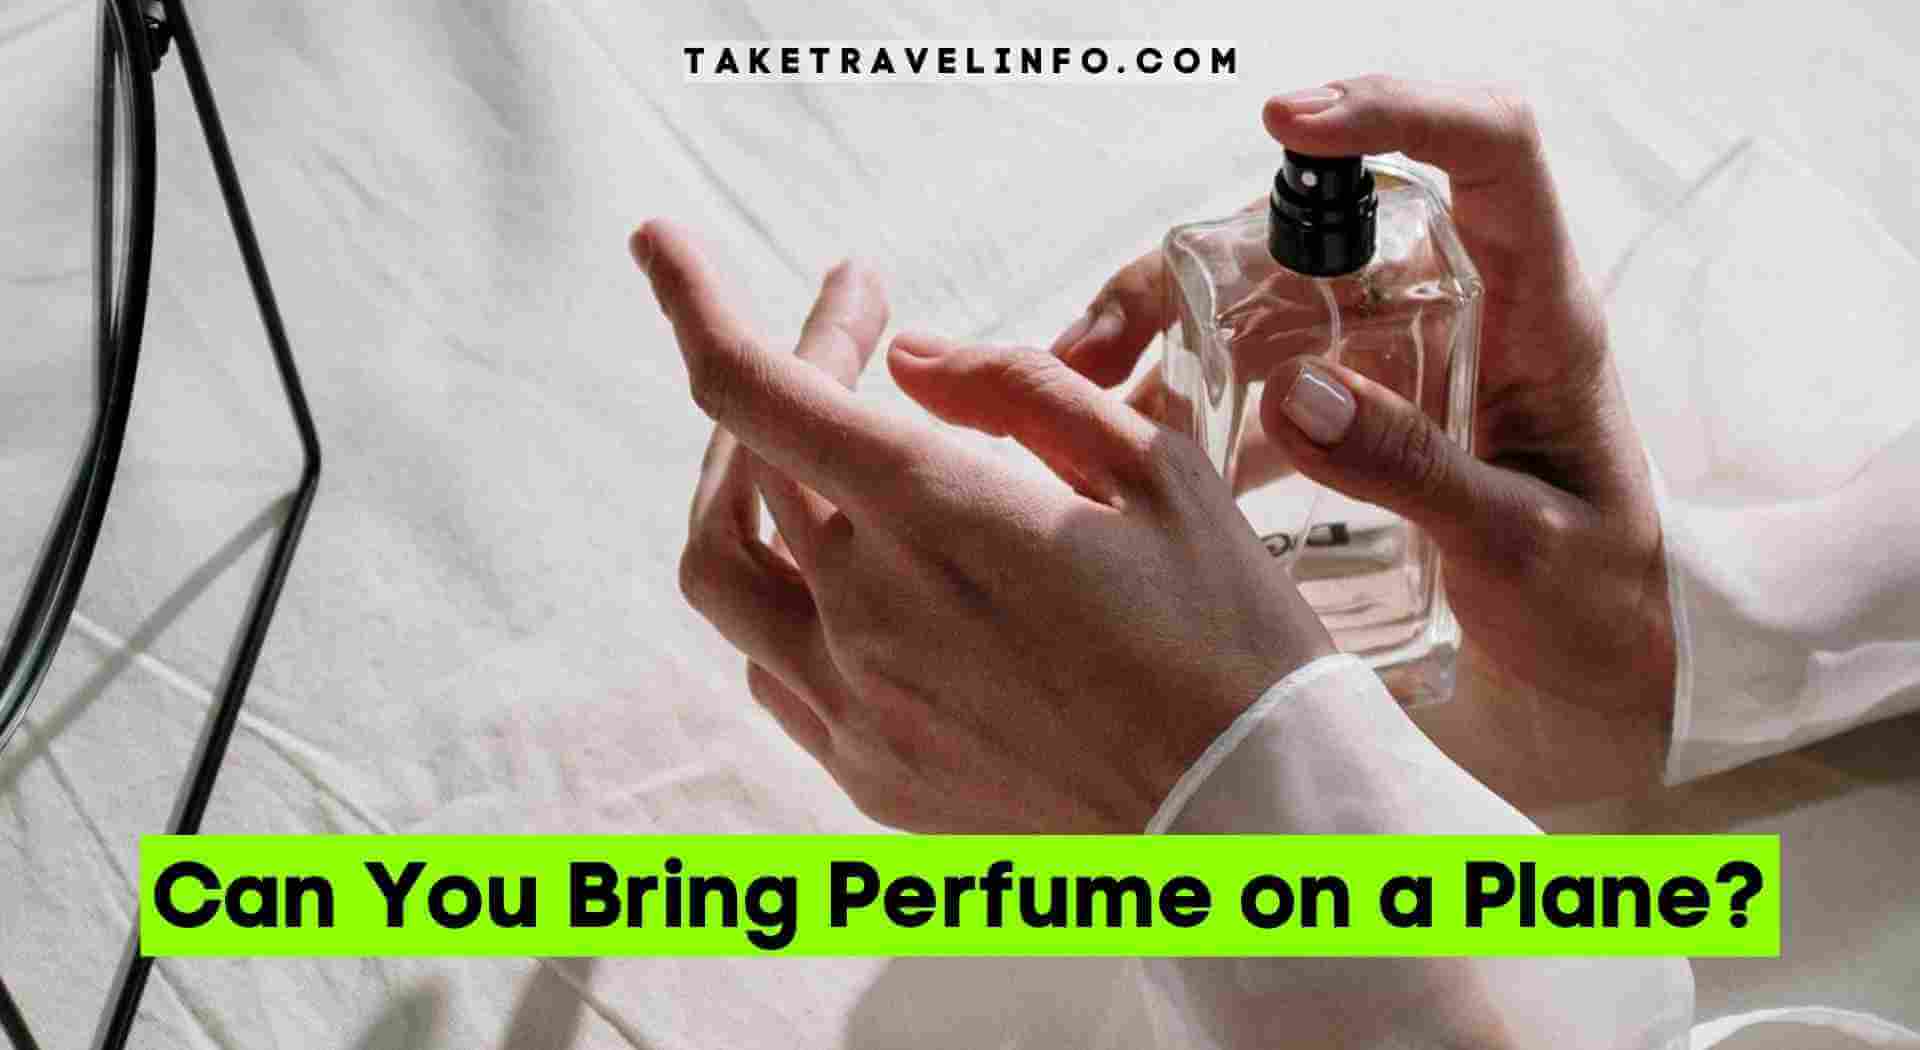 Can You Bring Perfume on a Plane